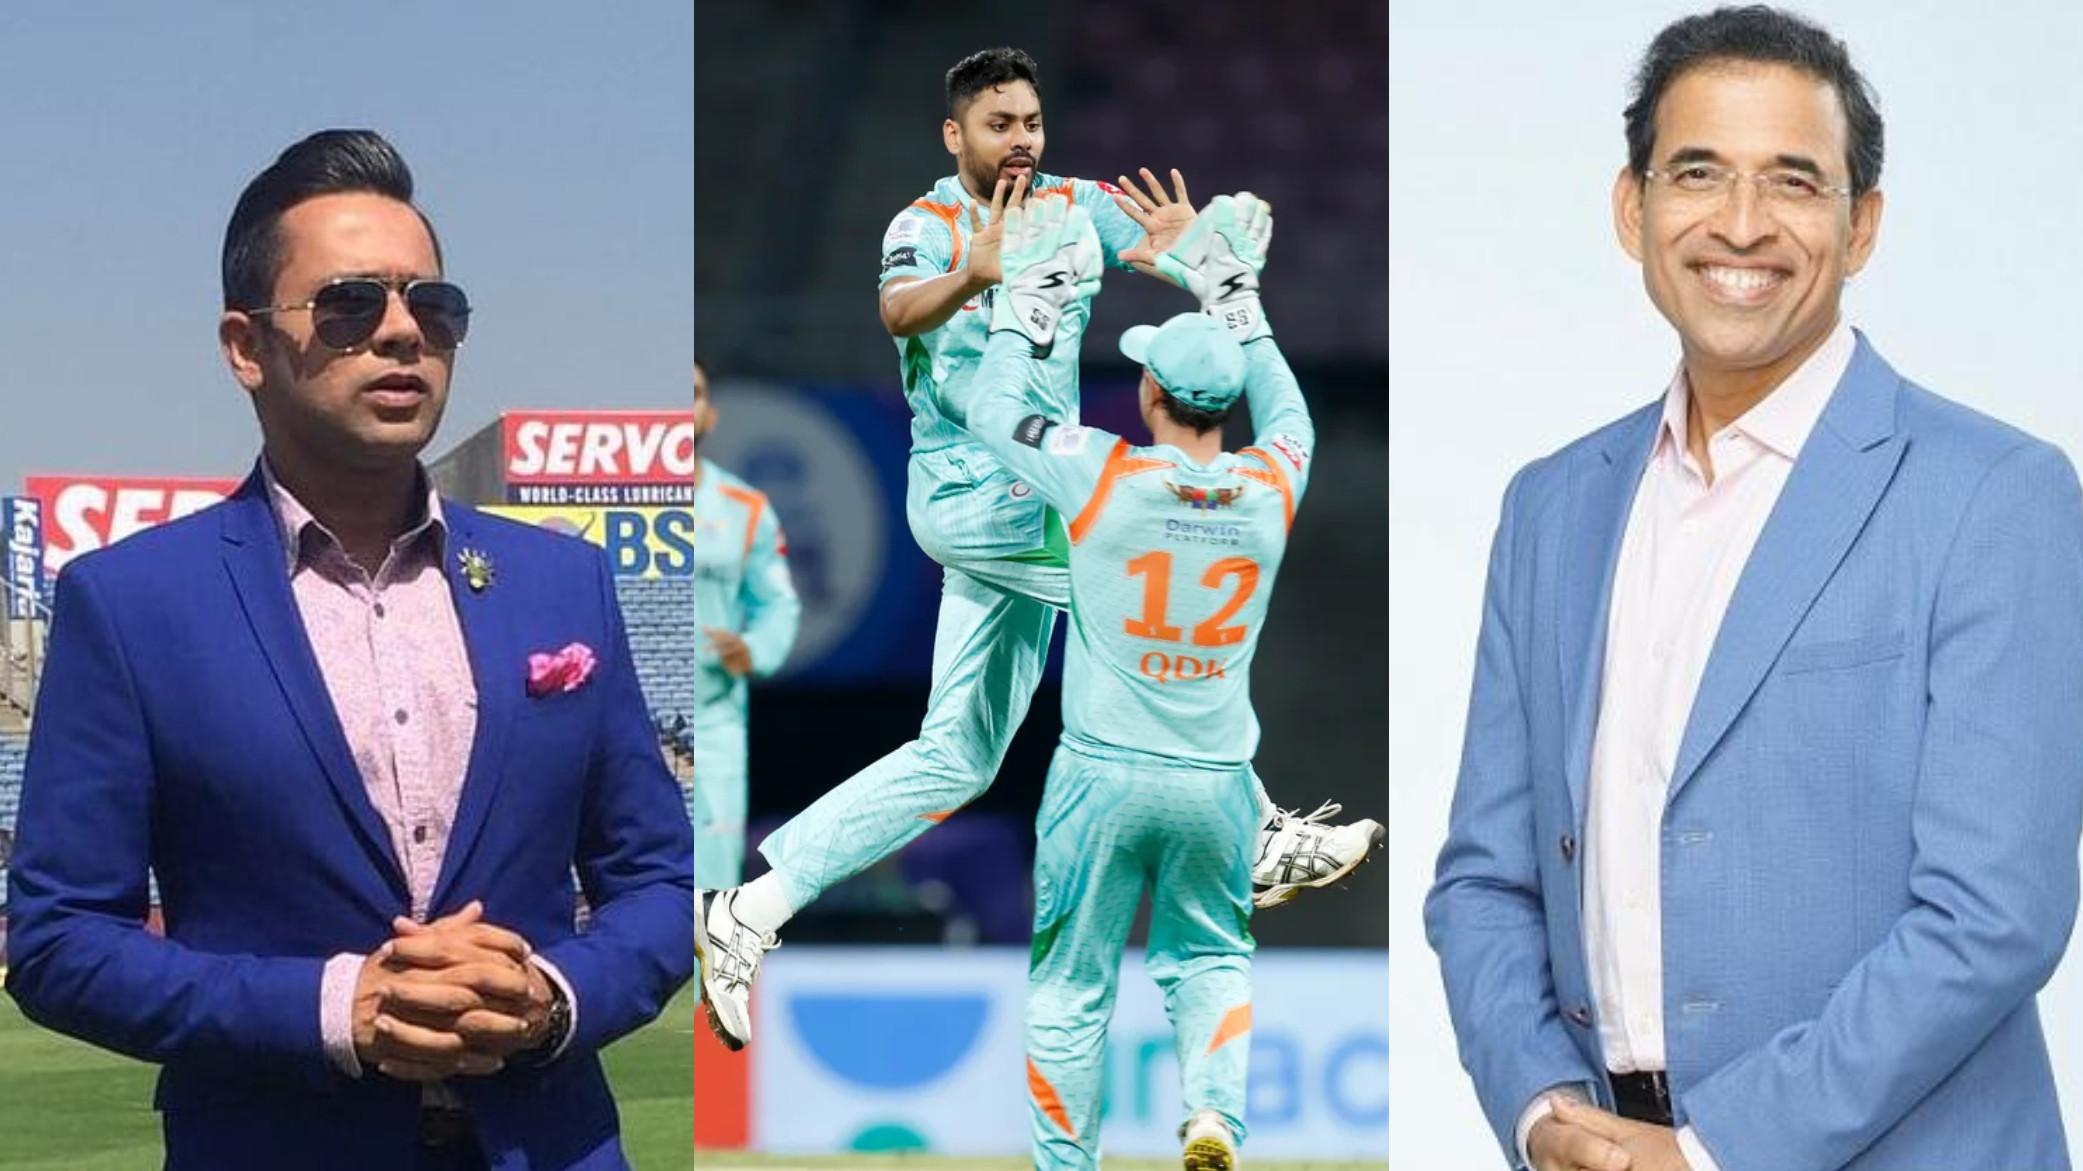 IPL 2022: Cricket fraternity reacts as LSG defeats SRH by 12 runs thanks to Avesh Khan's 4/24 